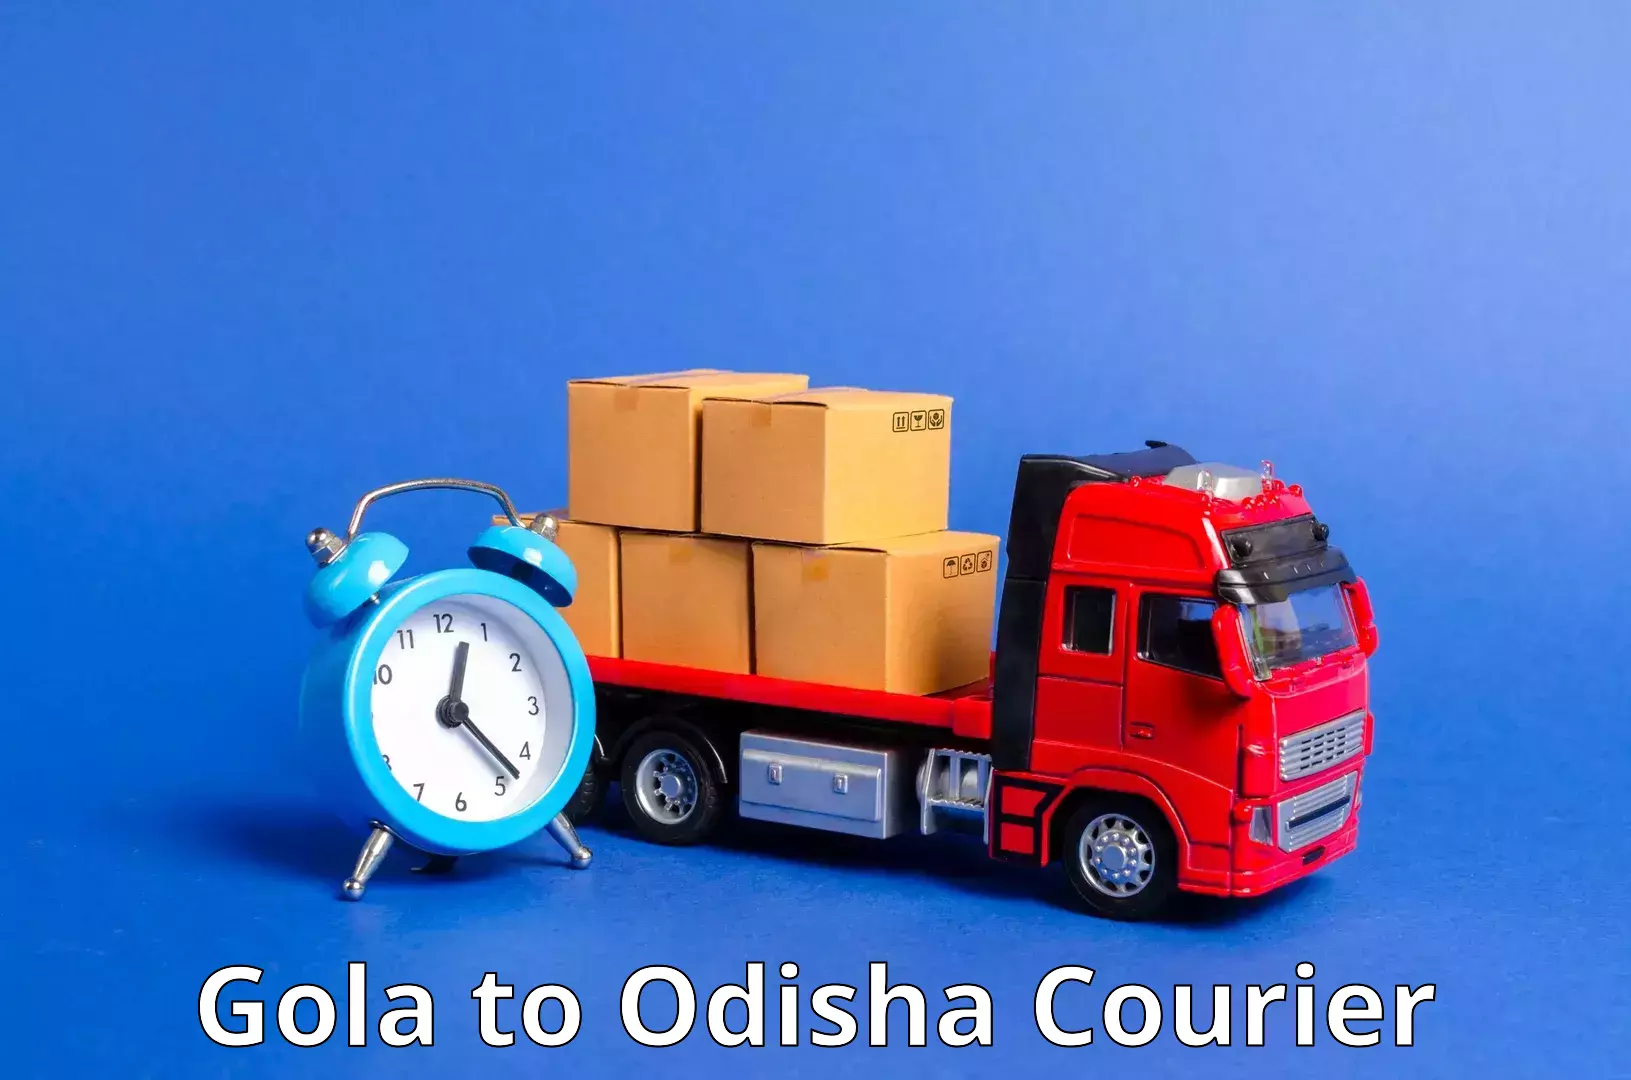 Efficient package consolidation Gola to Saintala